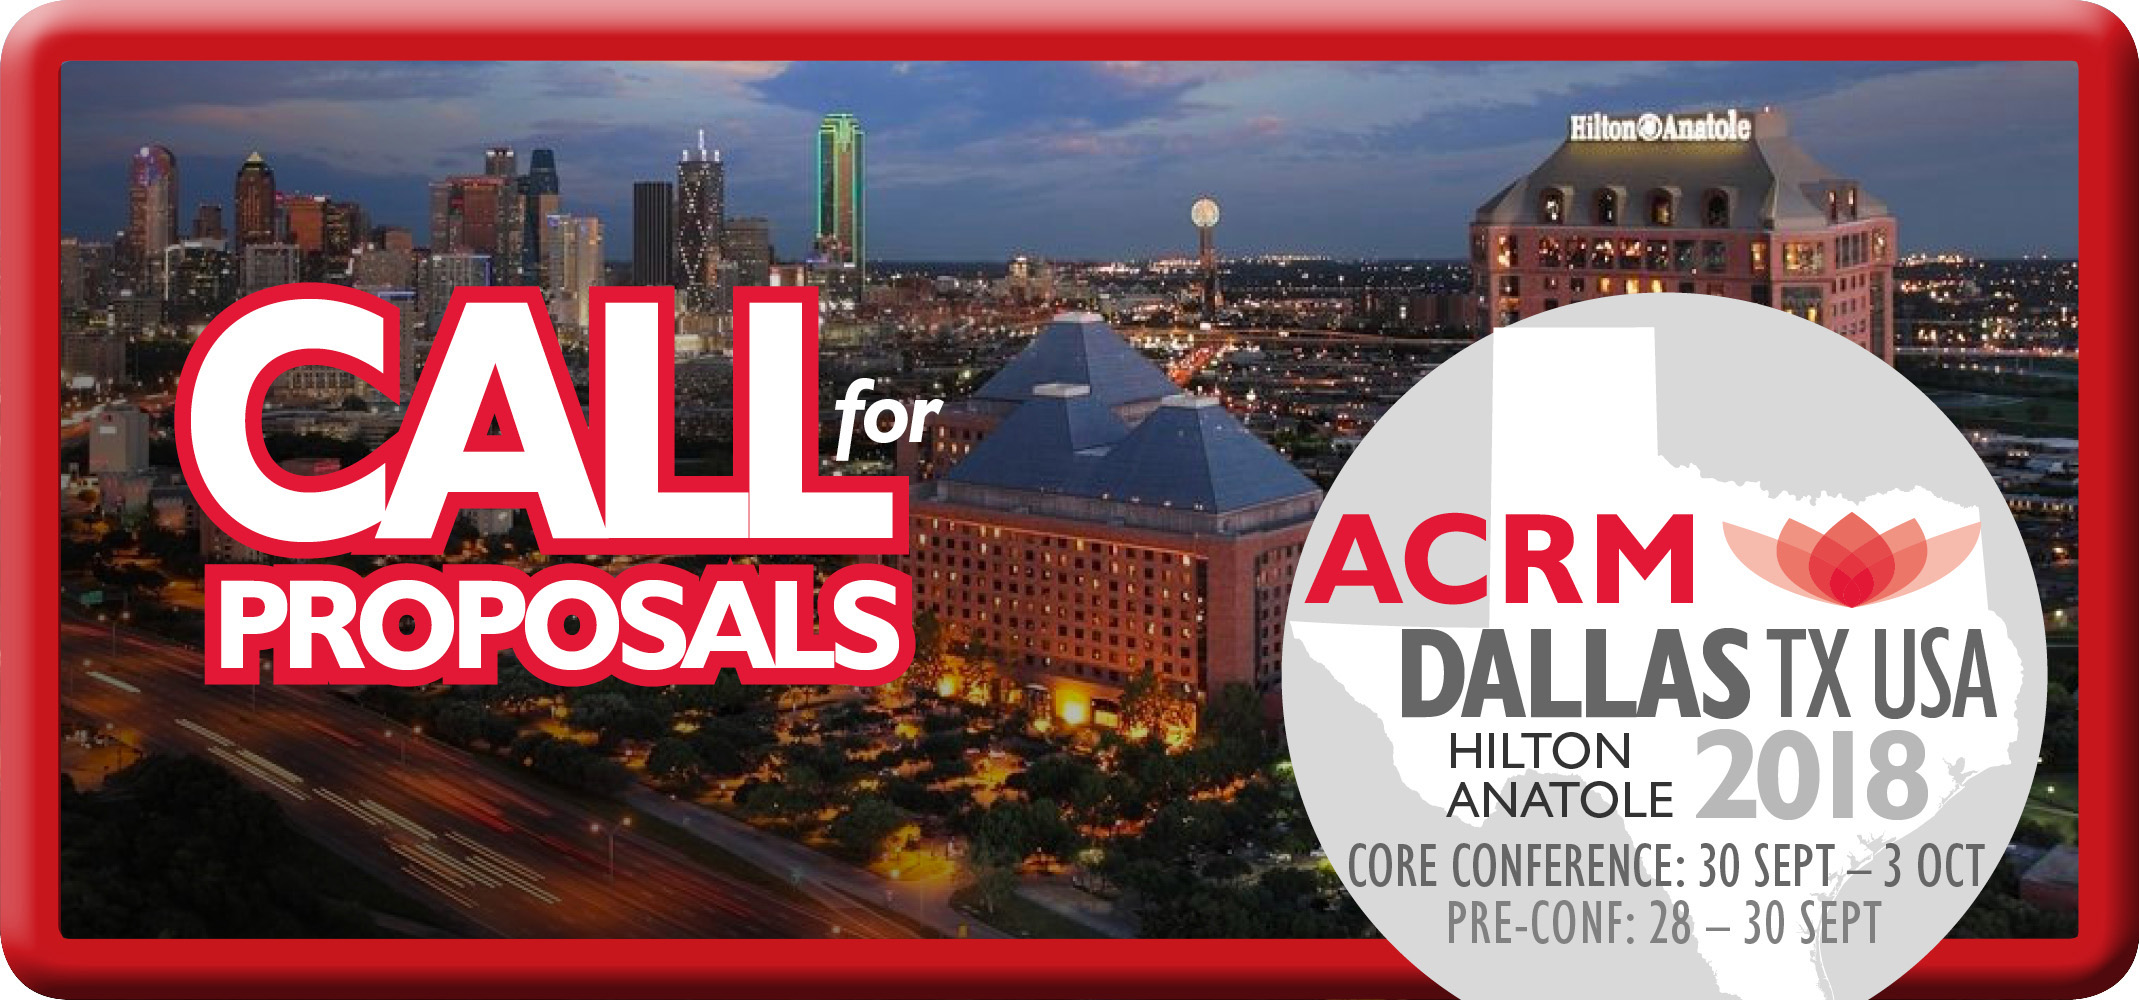 Amp up your research! ACRM Annual Conference Dallas 2018